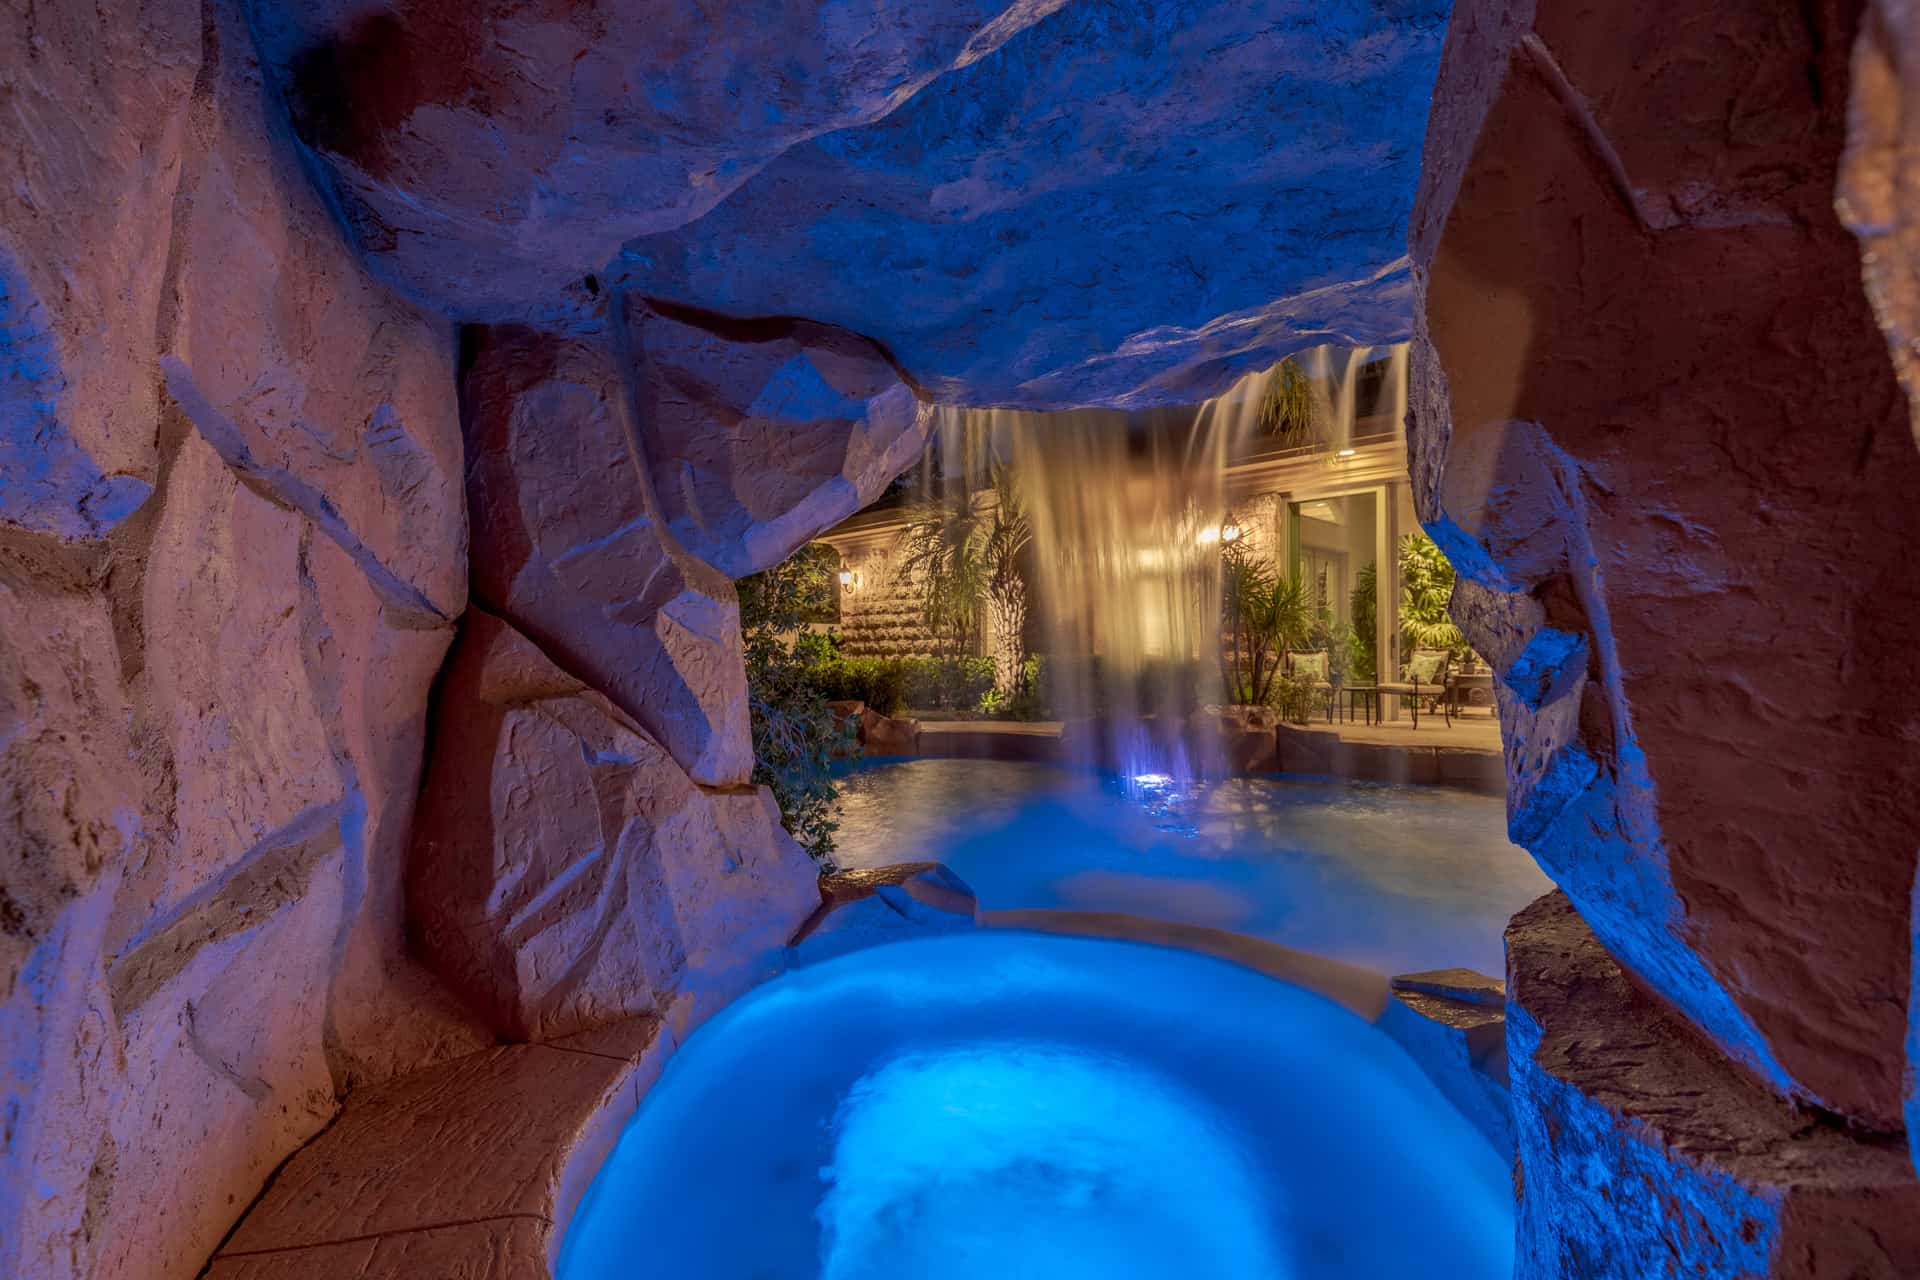 grotto spa with waterfall feature